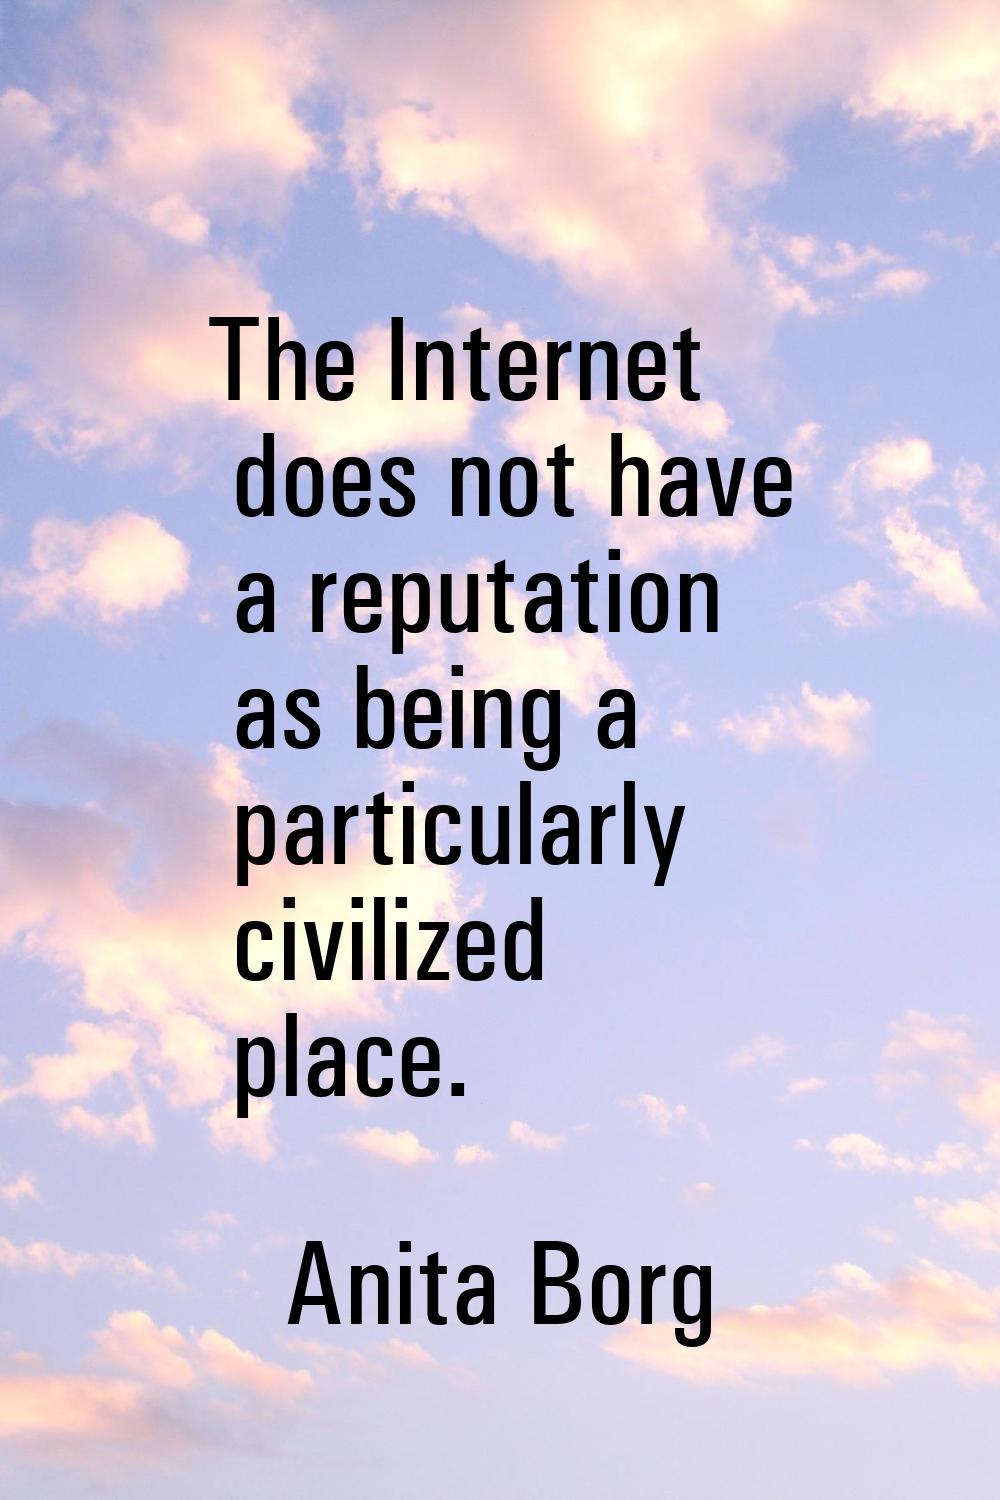 The Internet does not have a reputation as being a particularly civilized place.